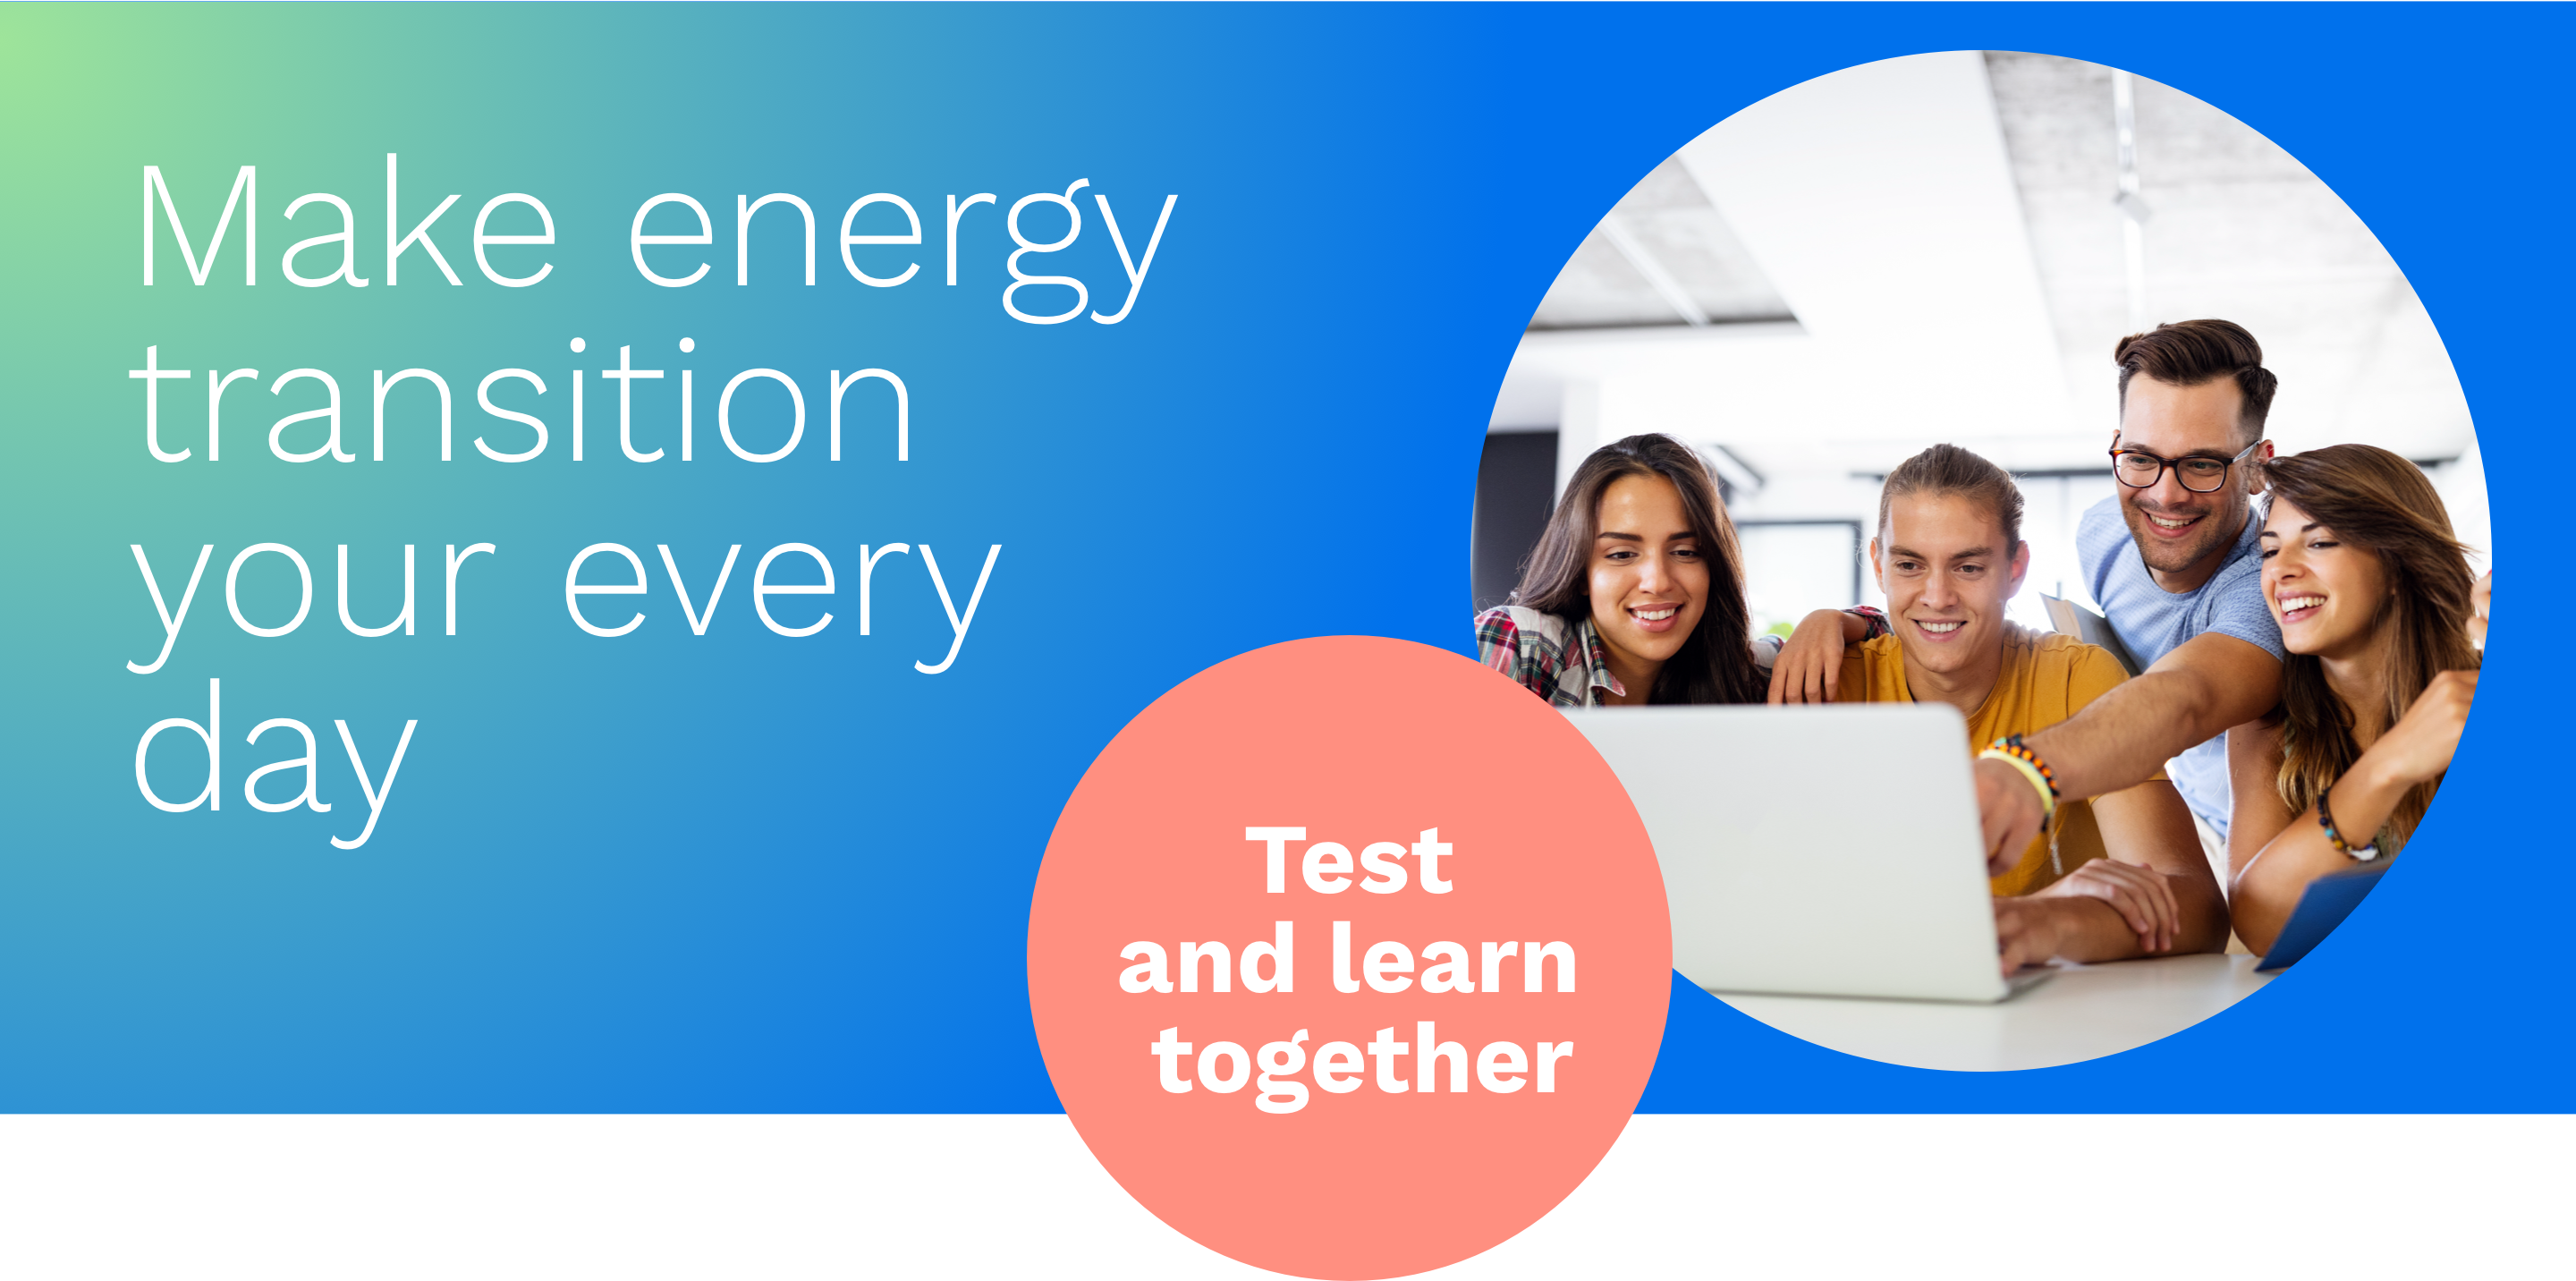 Image saying make energy transition your every day, test and learn together